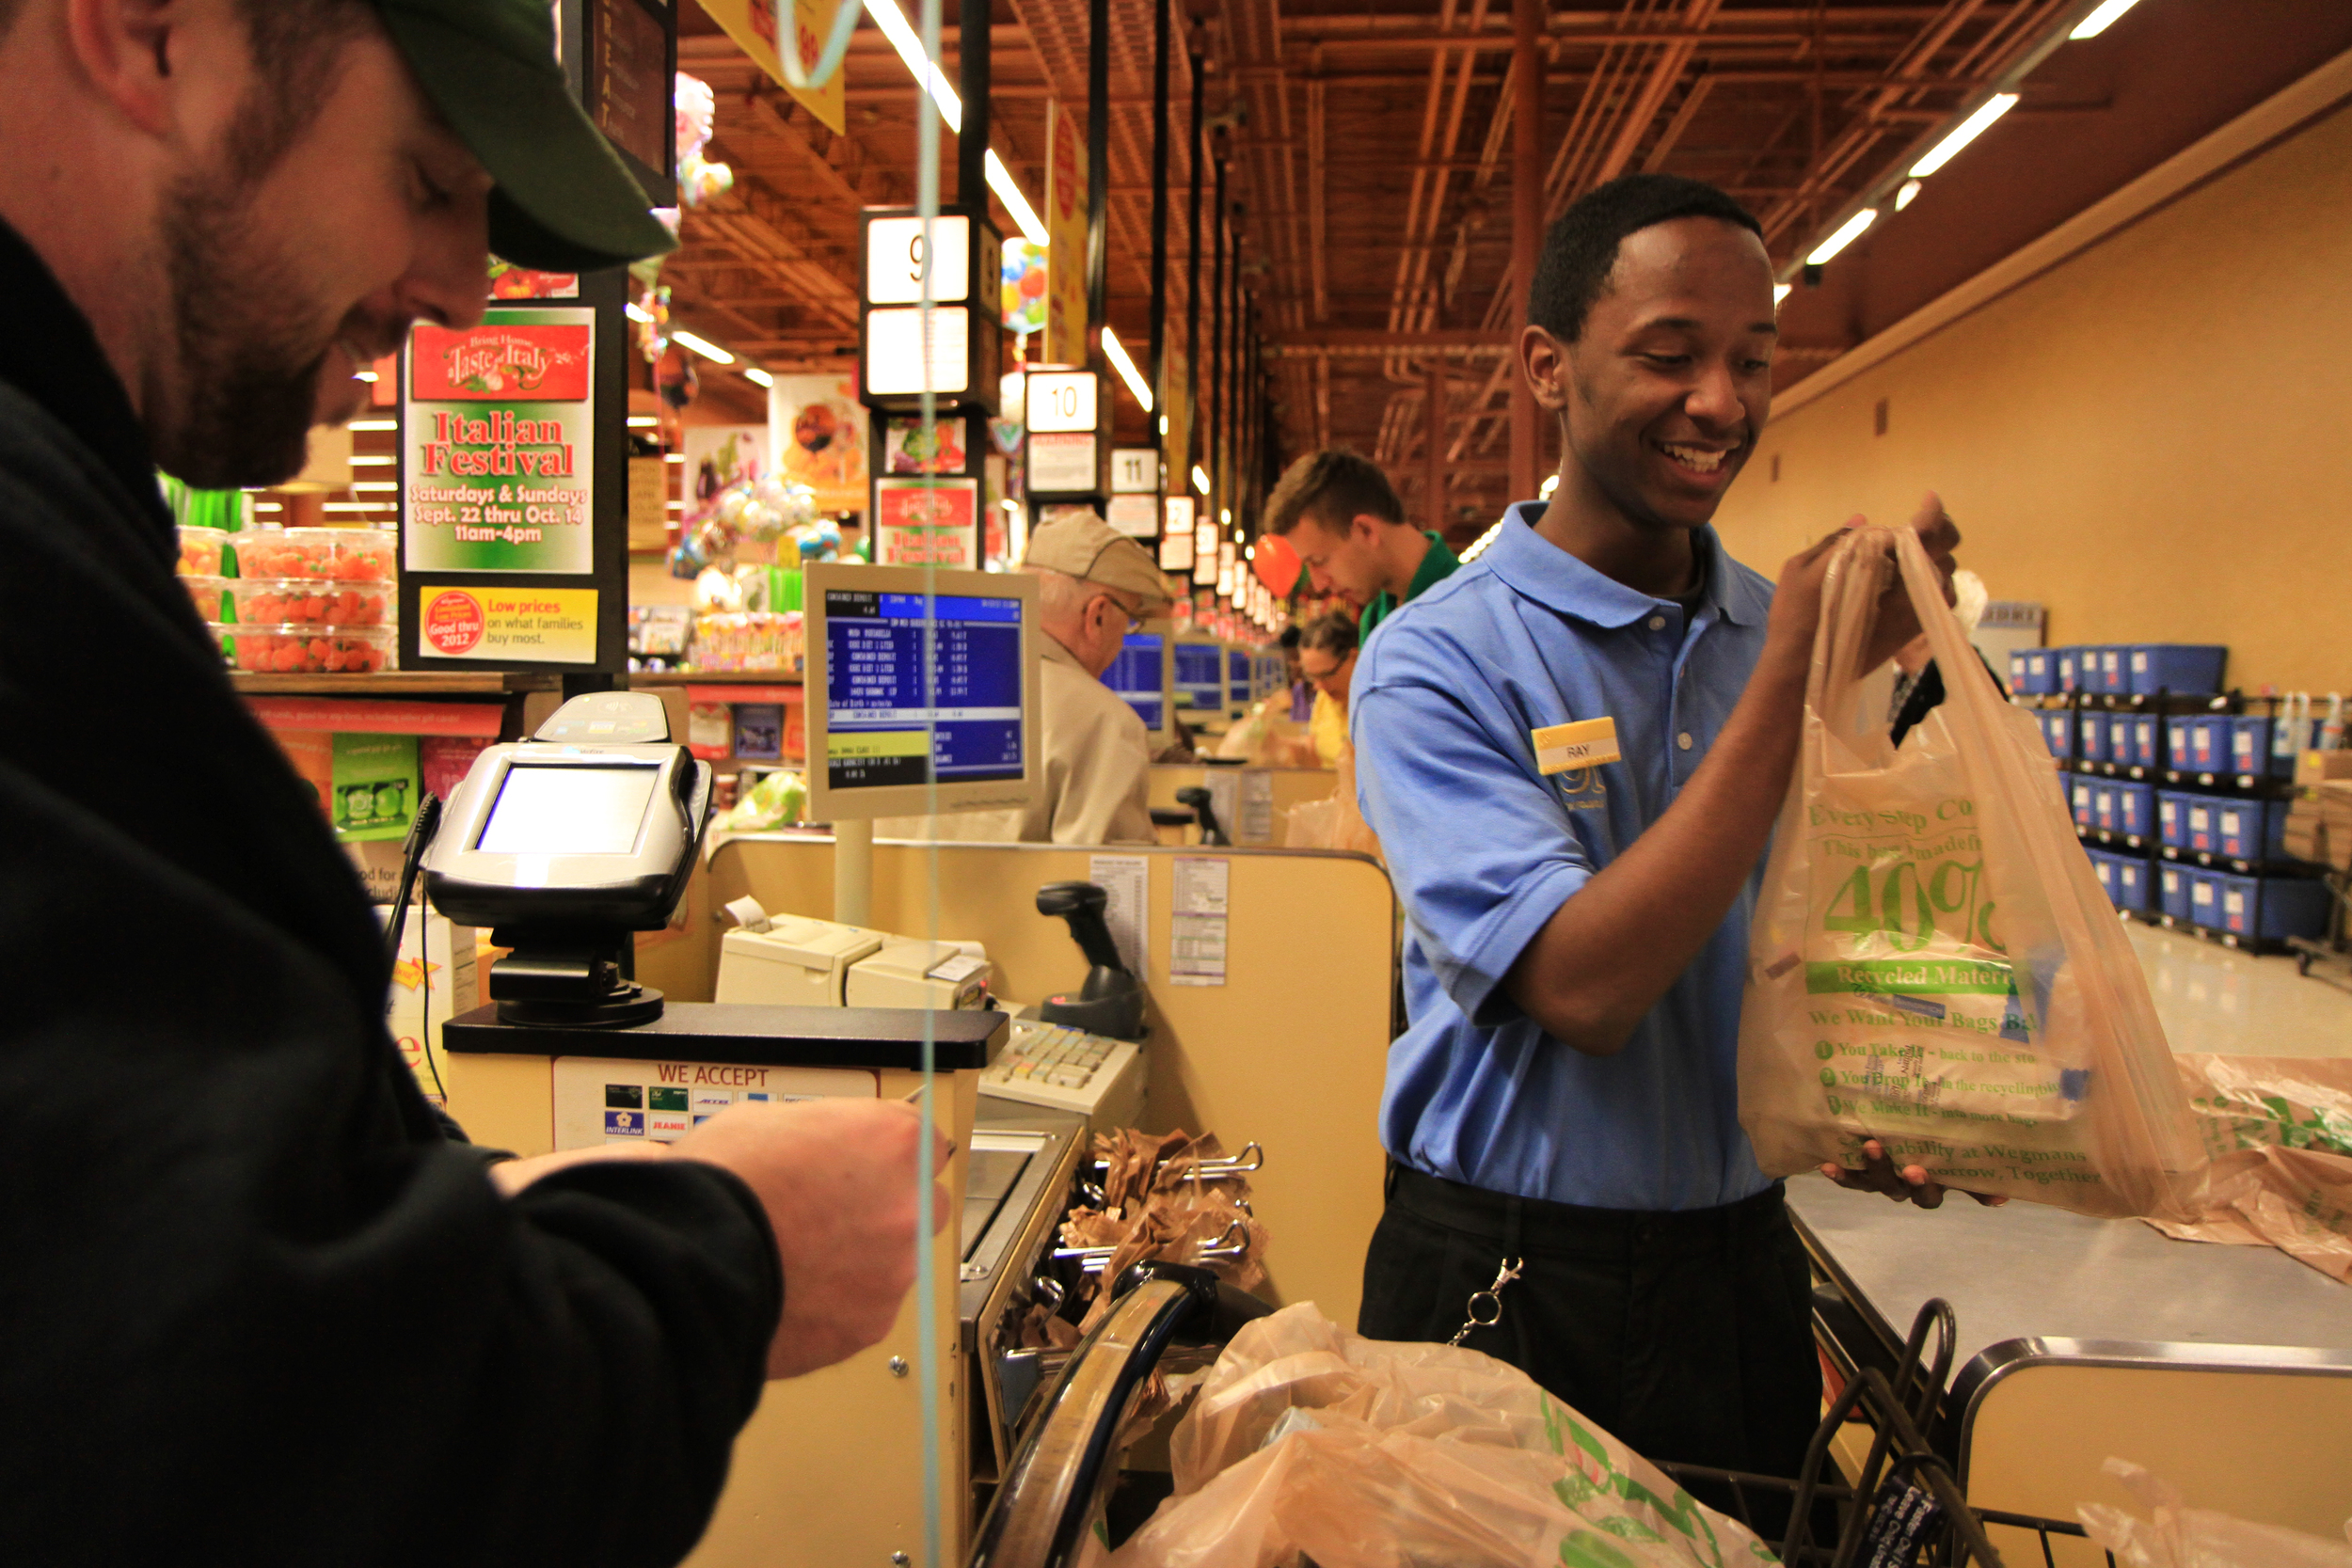  Tigner meets Josh Sandberg during his shift at Wegmans, Saturday. They are amused that they share the same birthdate.  